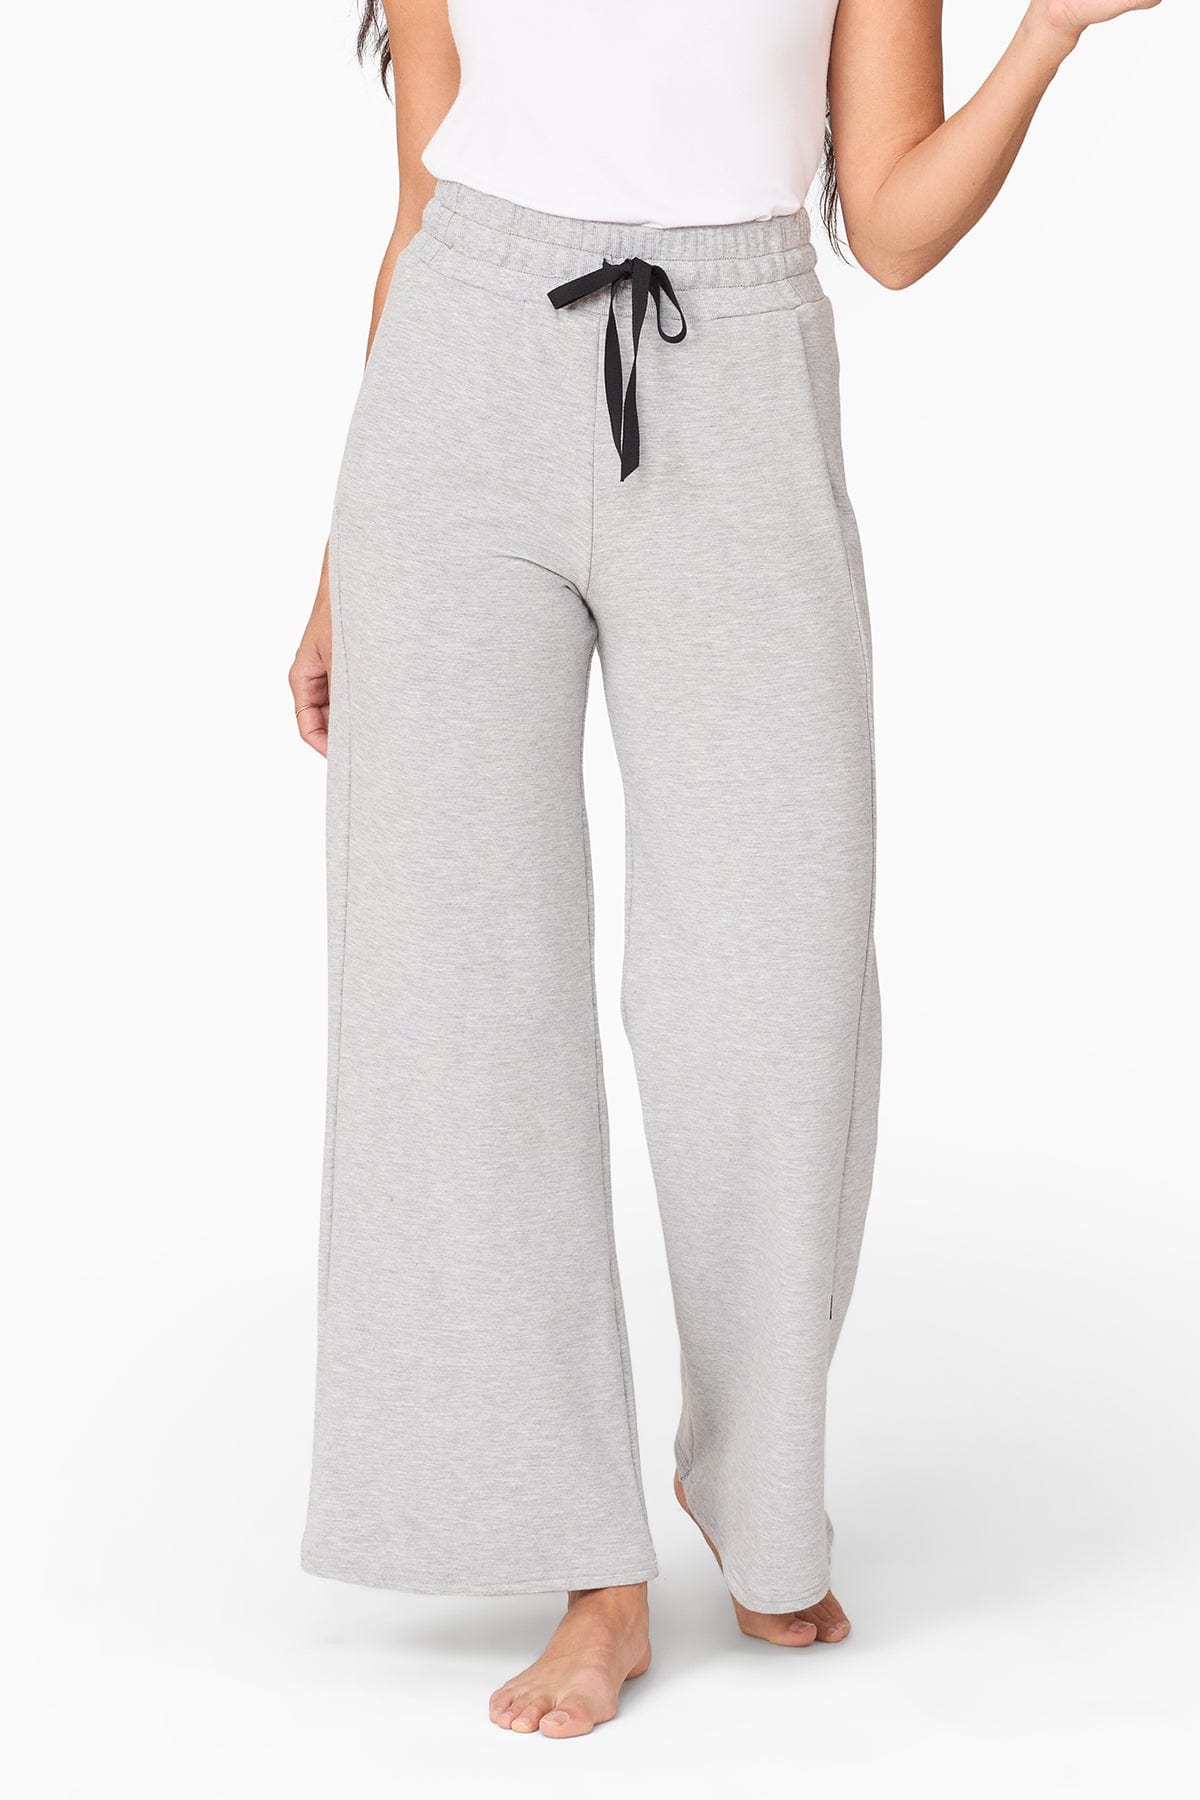 So Comfy Wide Leg Pant Cropped Length - Charcoal